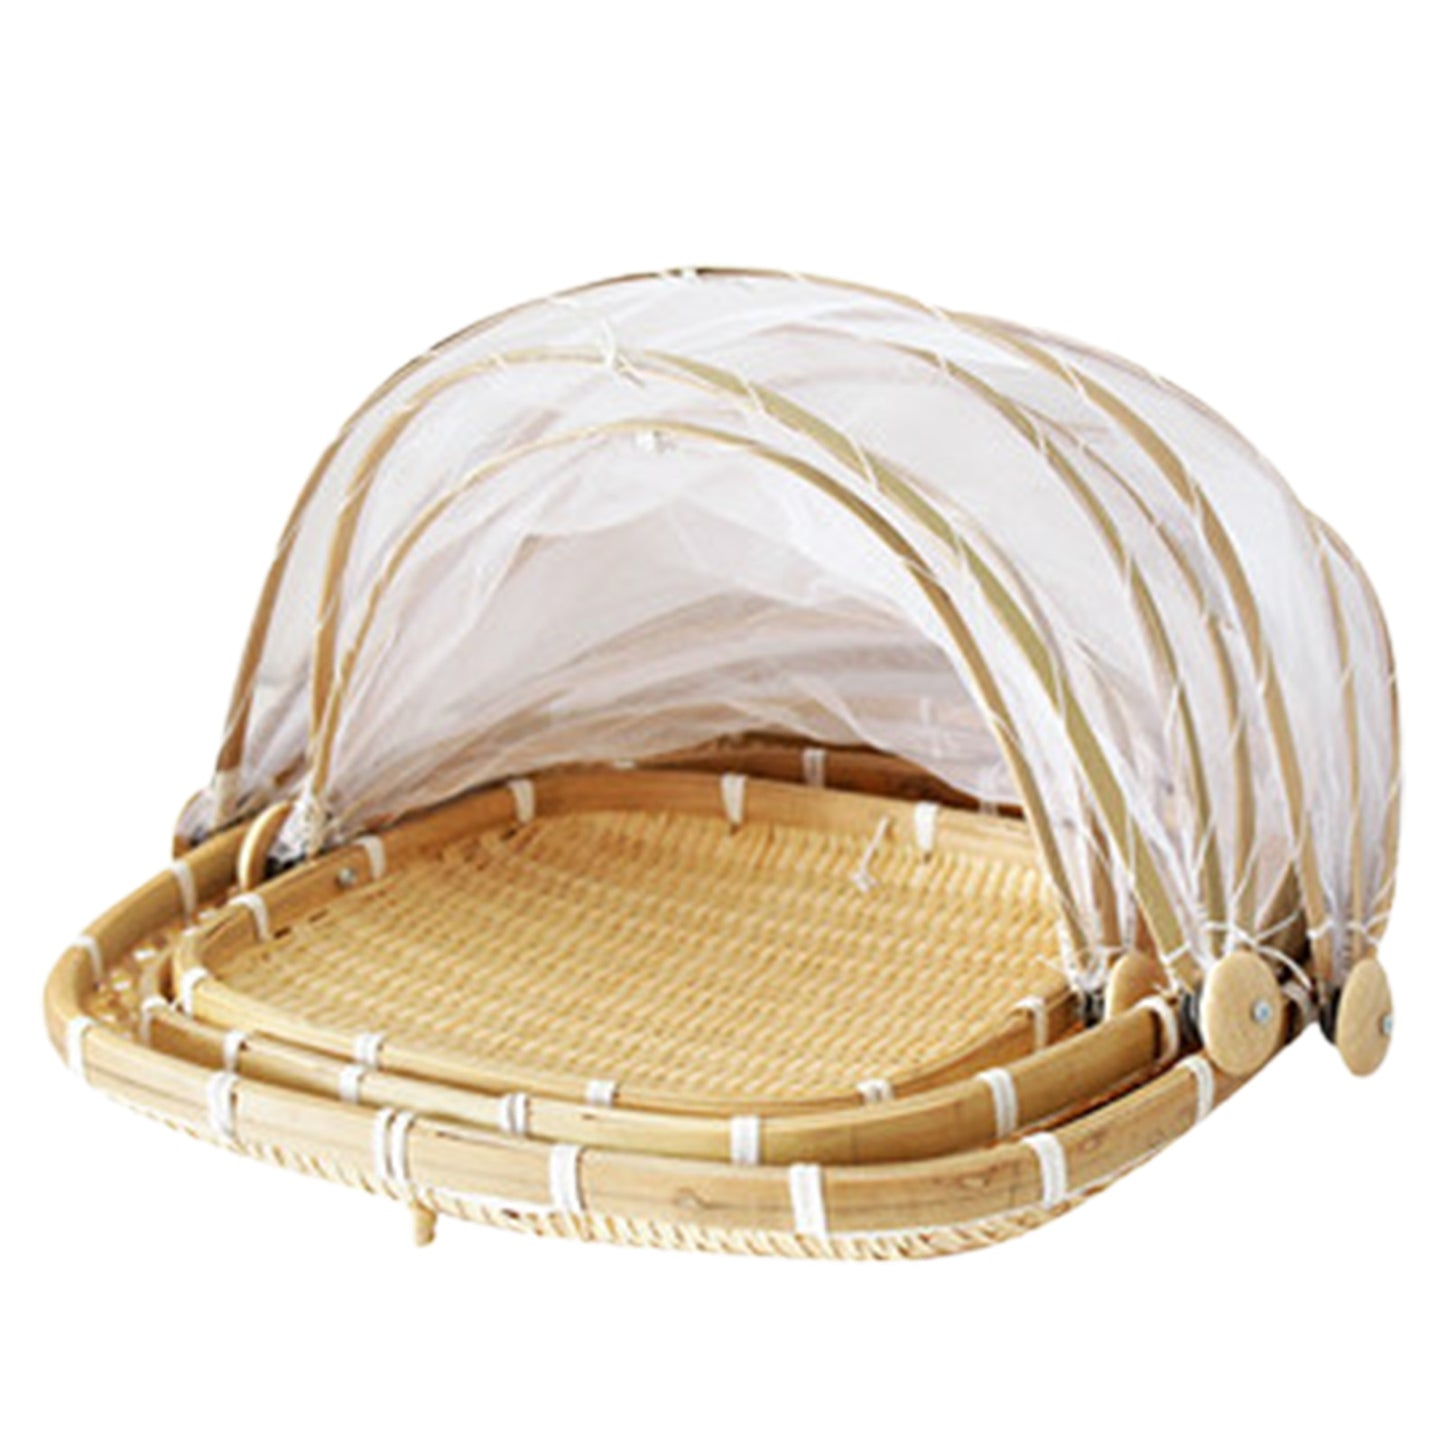 Hand-Woven Food Serving Basket, Vegetable and Bread Basket with Mesh Net Cover to keep insects away - Forplanetsake